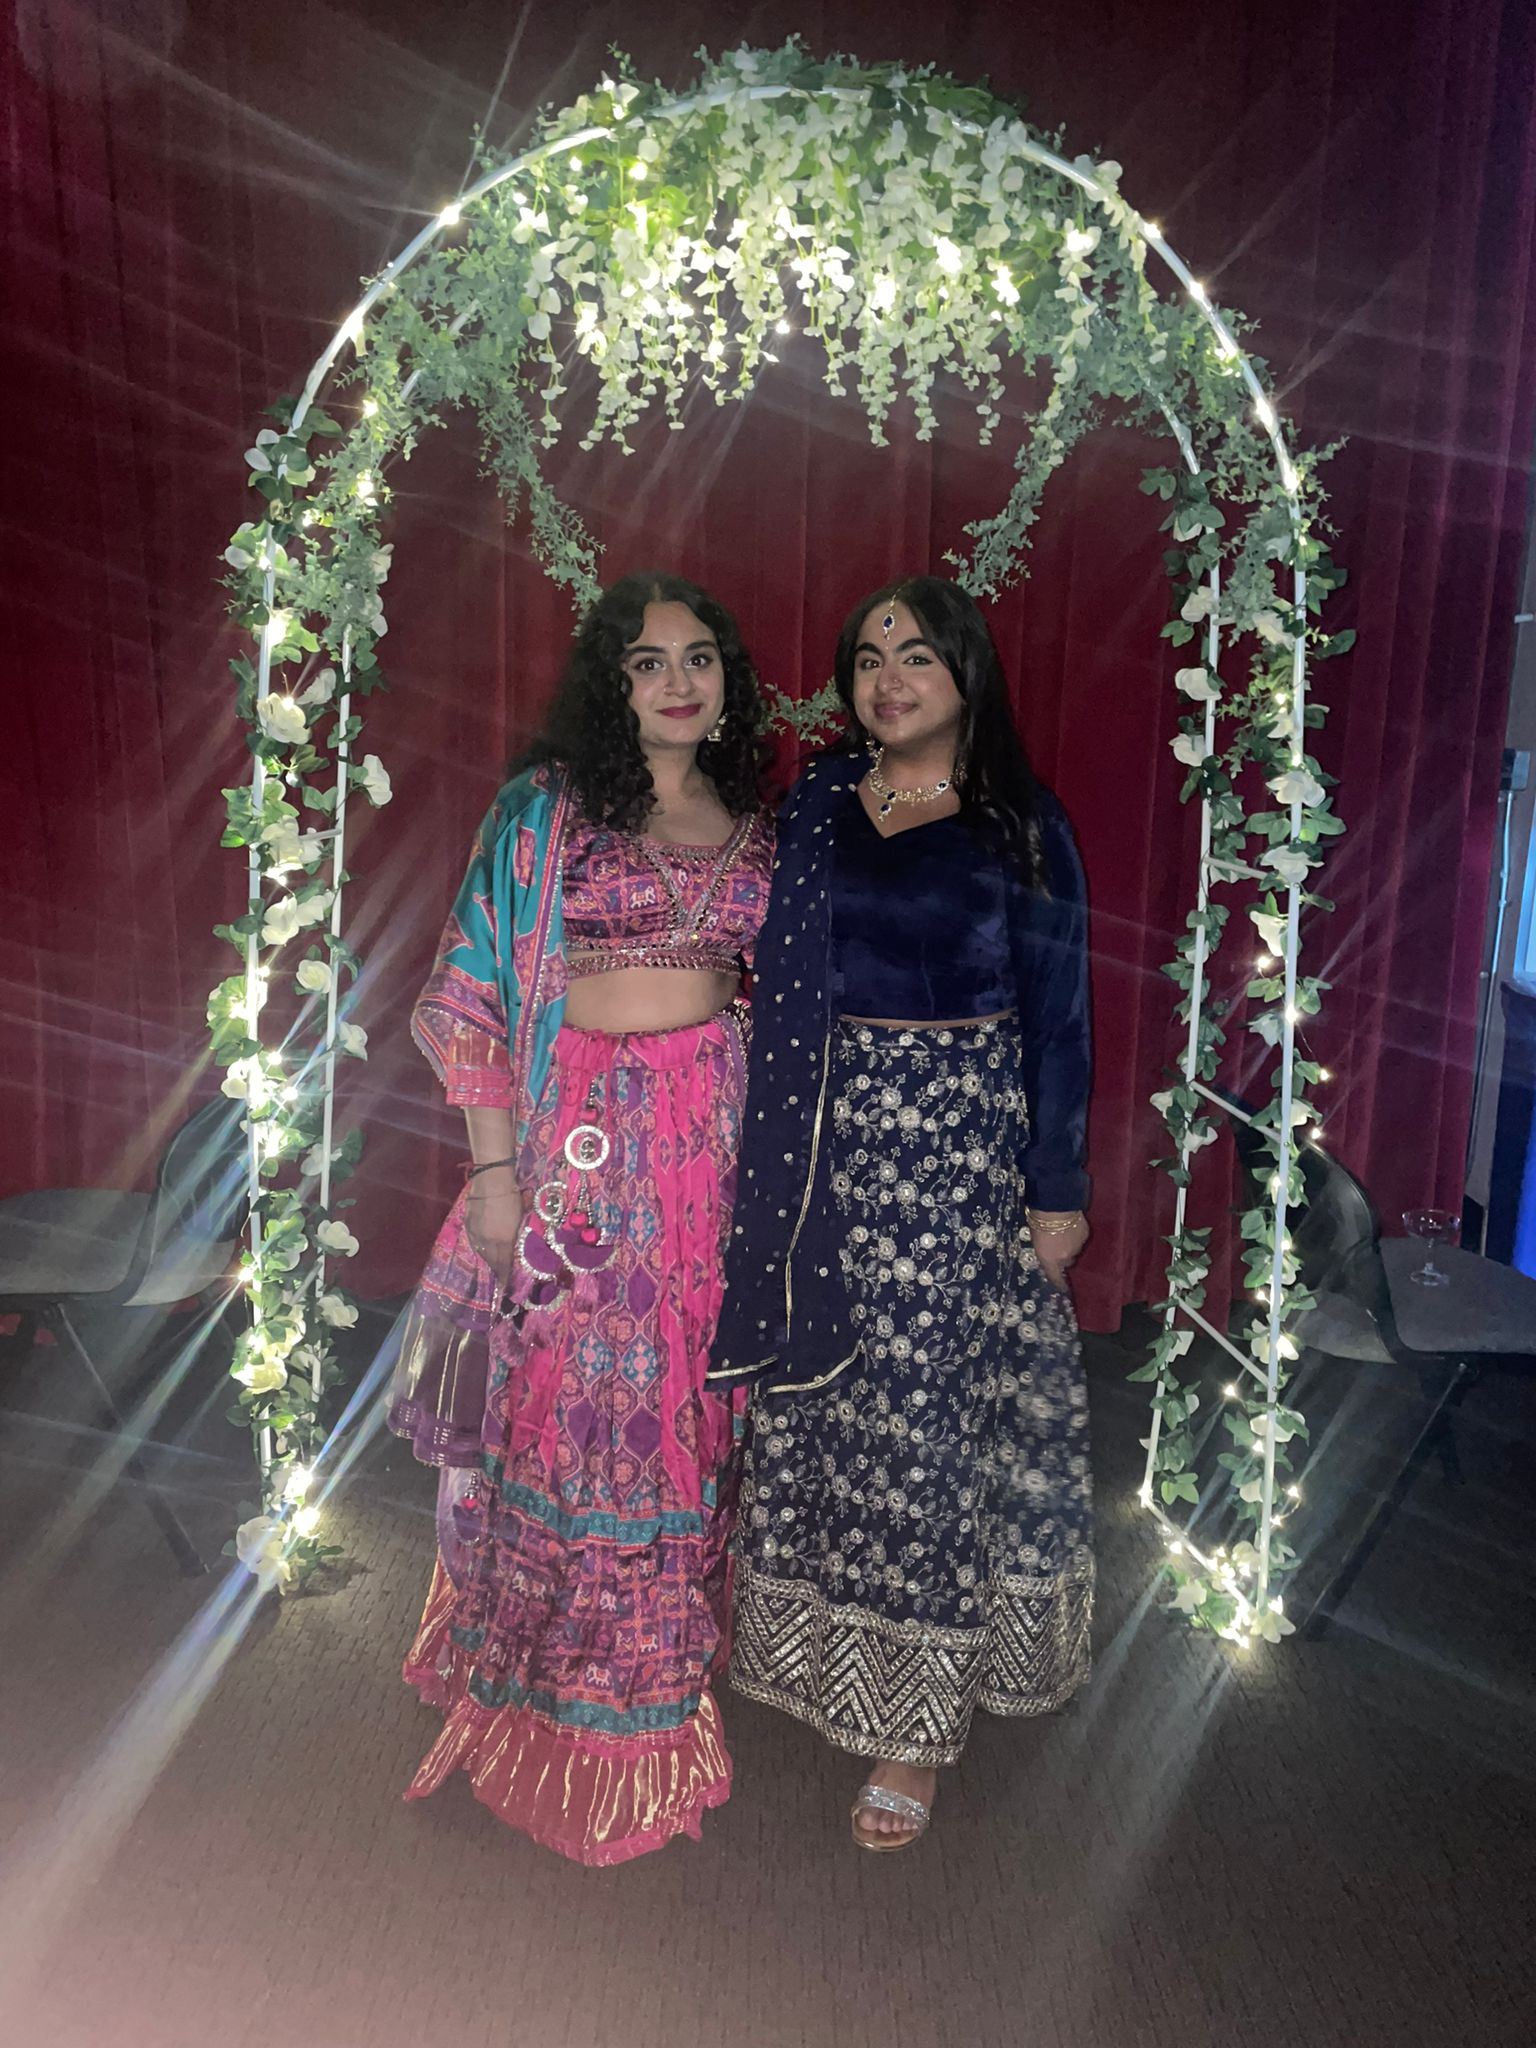 Eshika and friend in traditional indian wear at the sorority's charity gala event